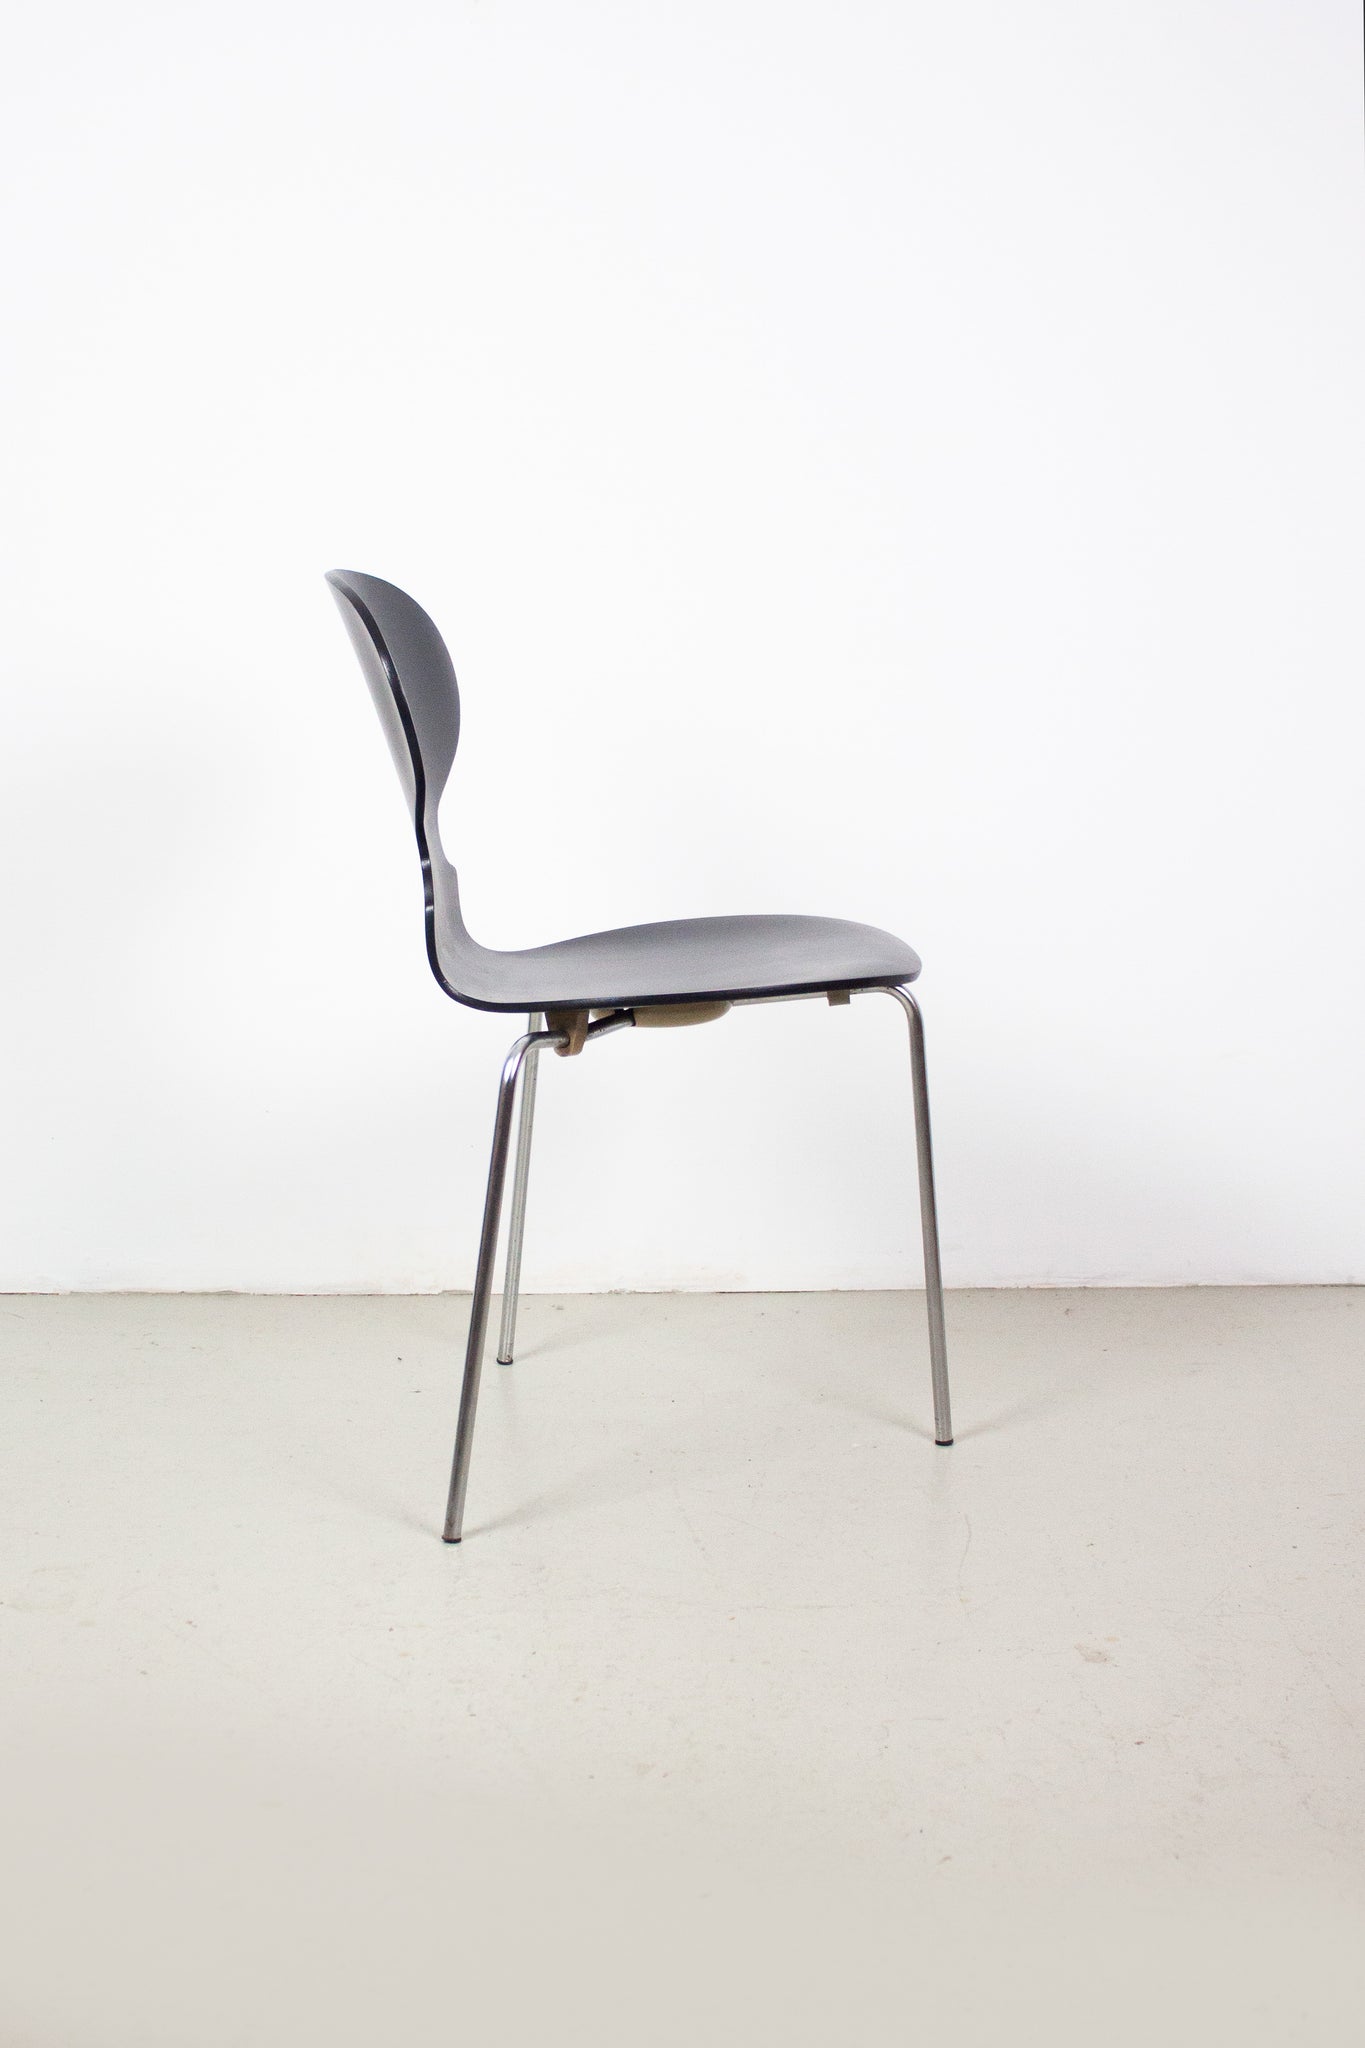 Ant Chairs by Arne Jacobsen for Fritz Hansen (Set of 2)